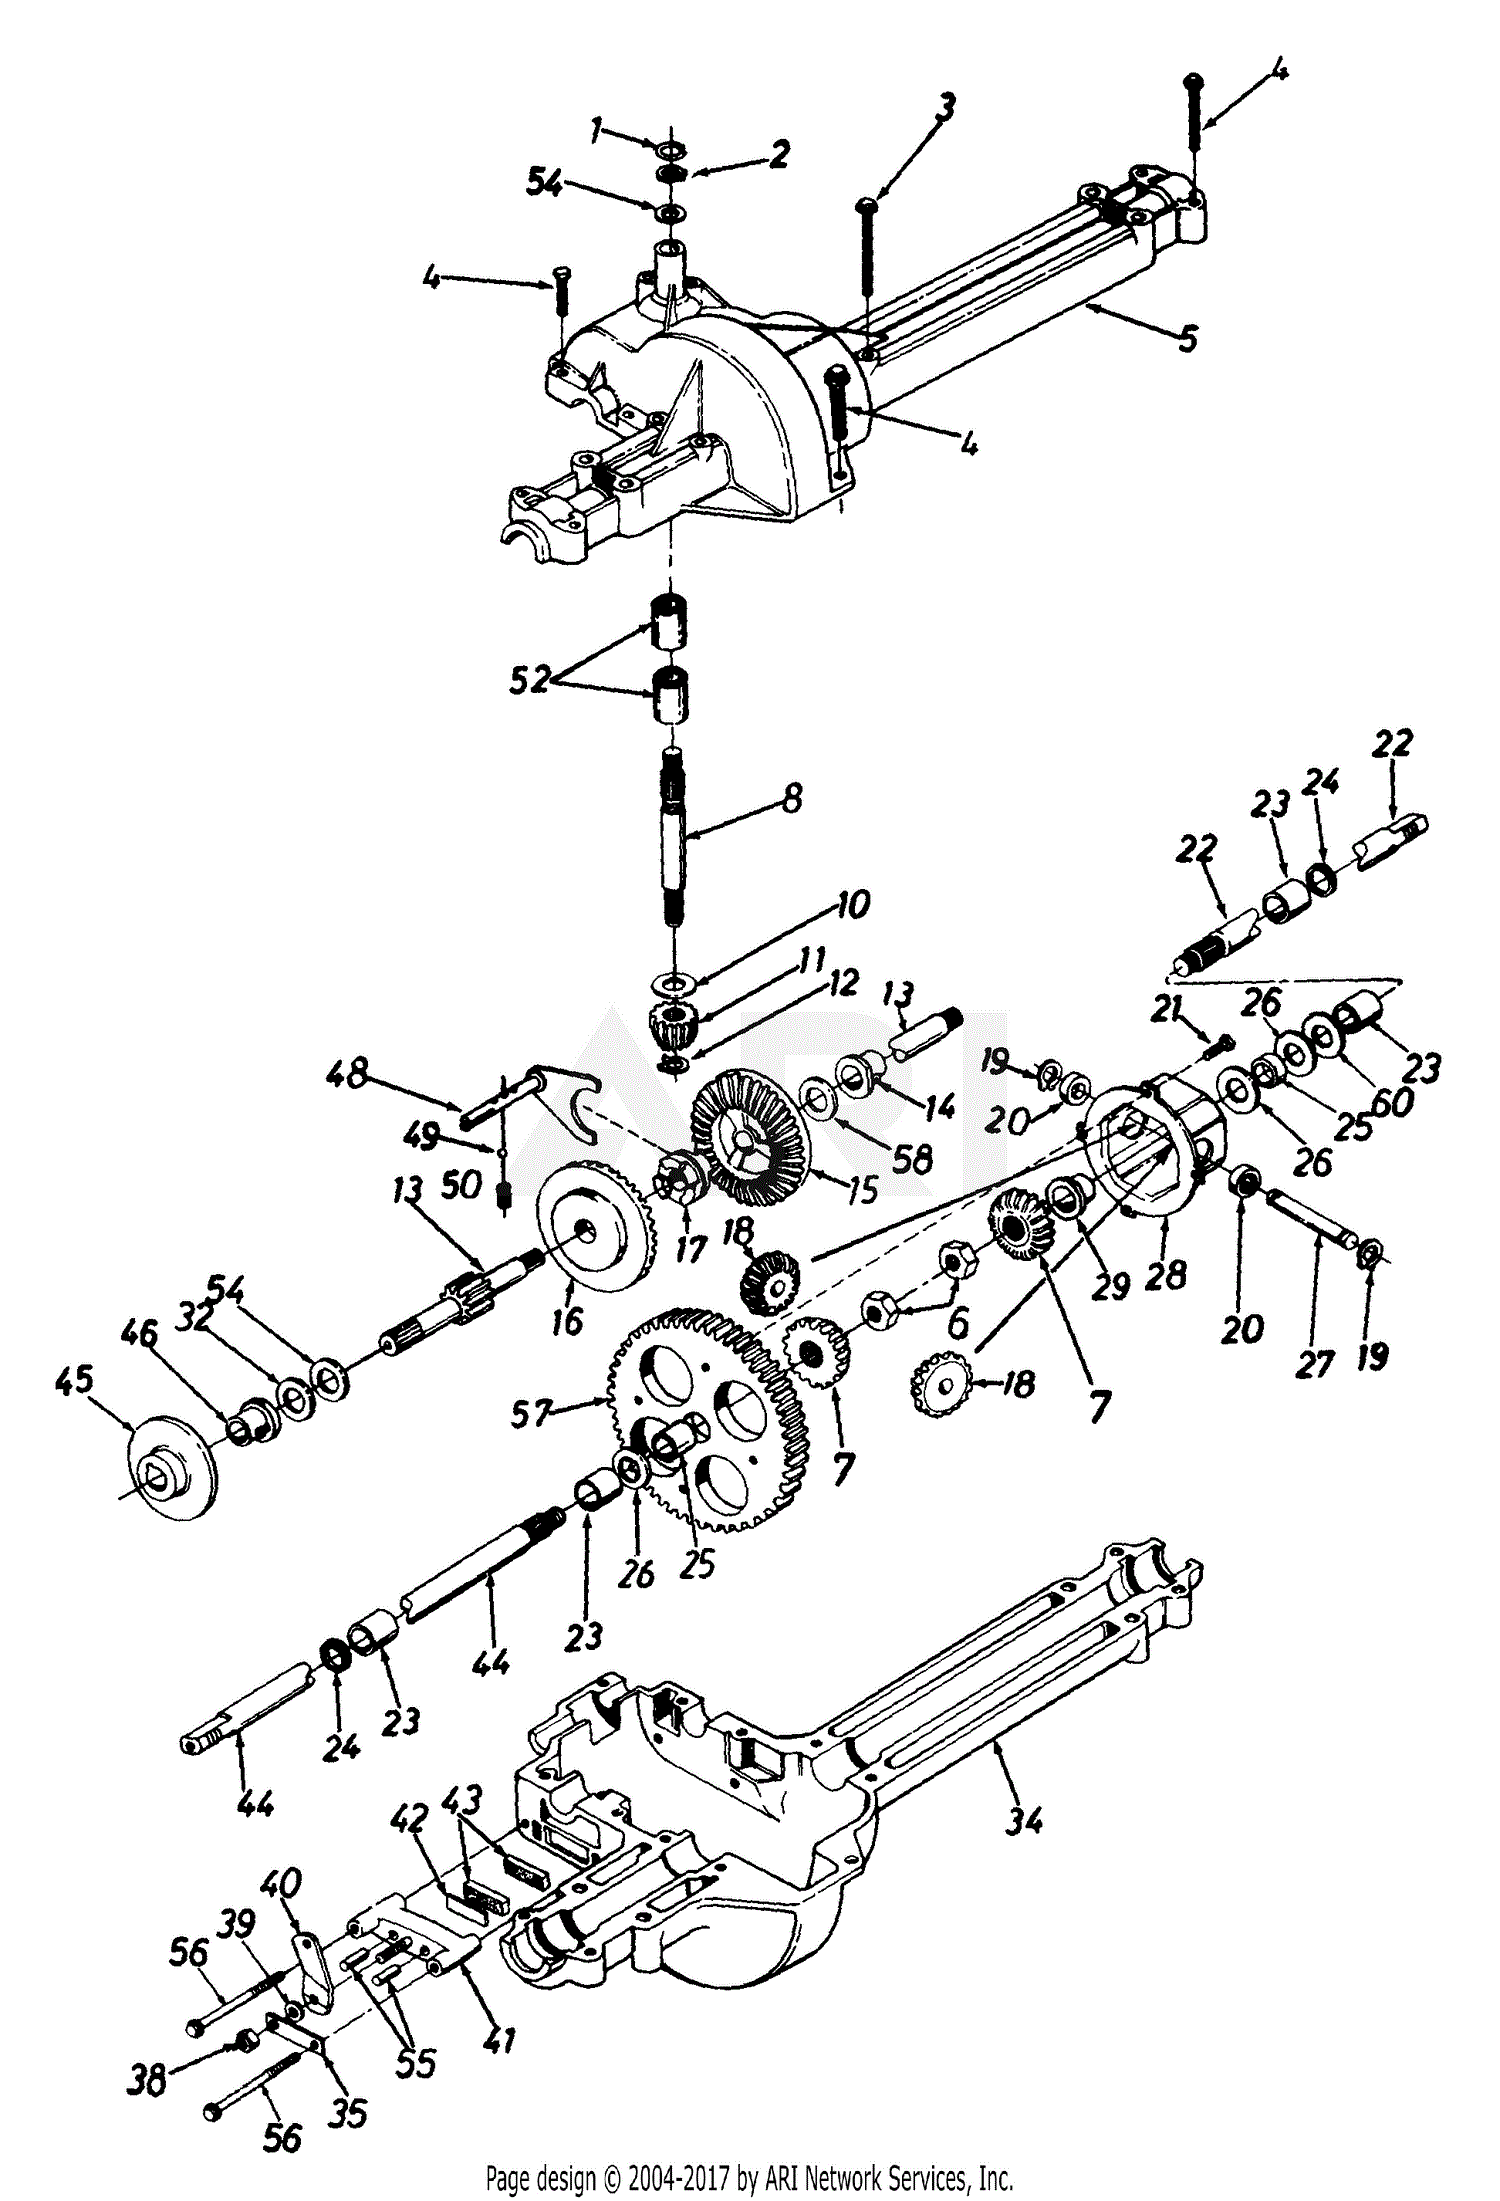 MTD 135C471F190 Lawn Tractor L-12 (1995) Parts Diagram for Single Speed ...